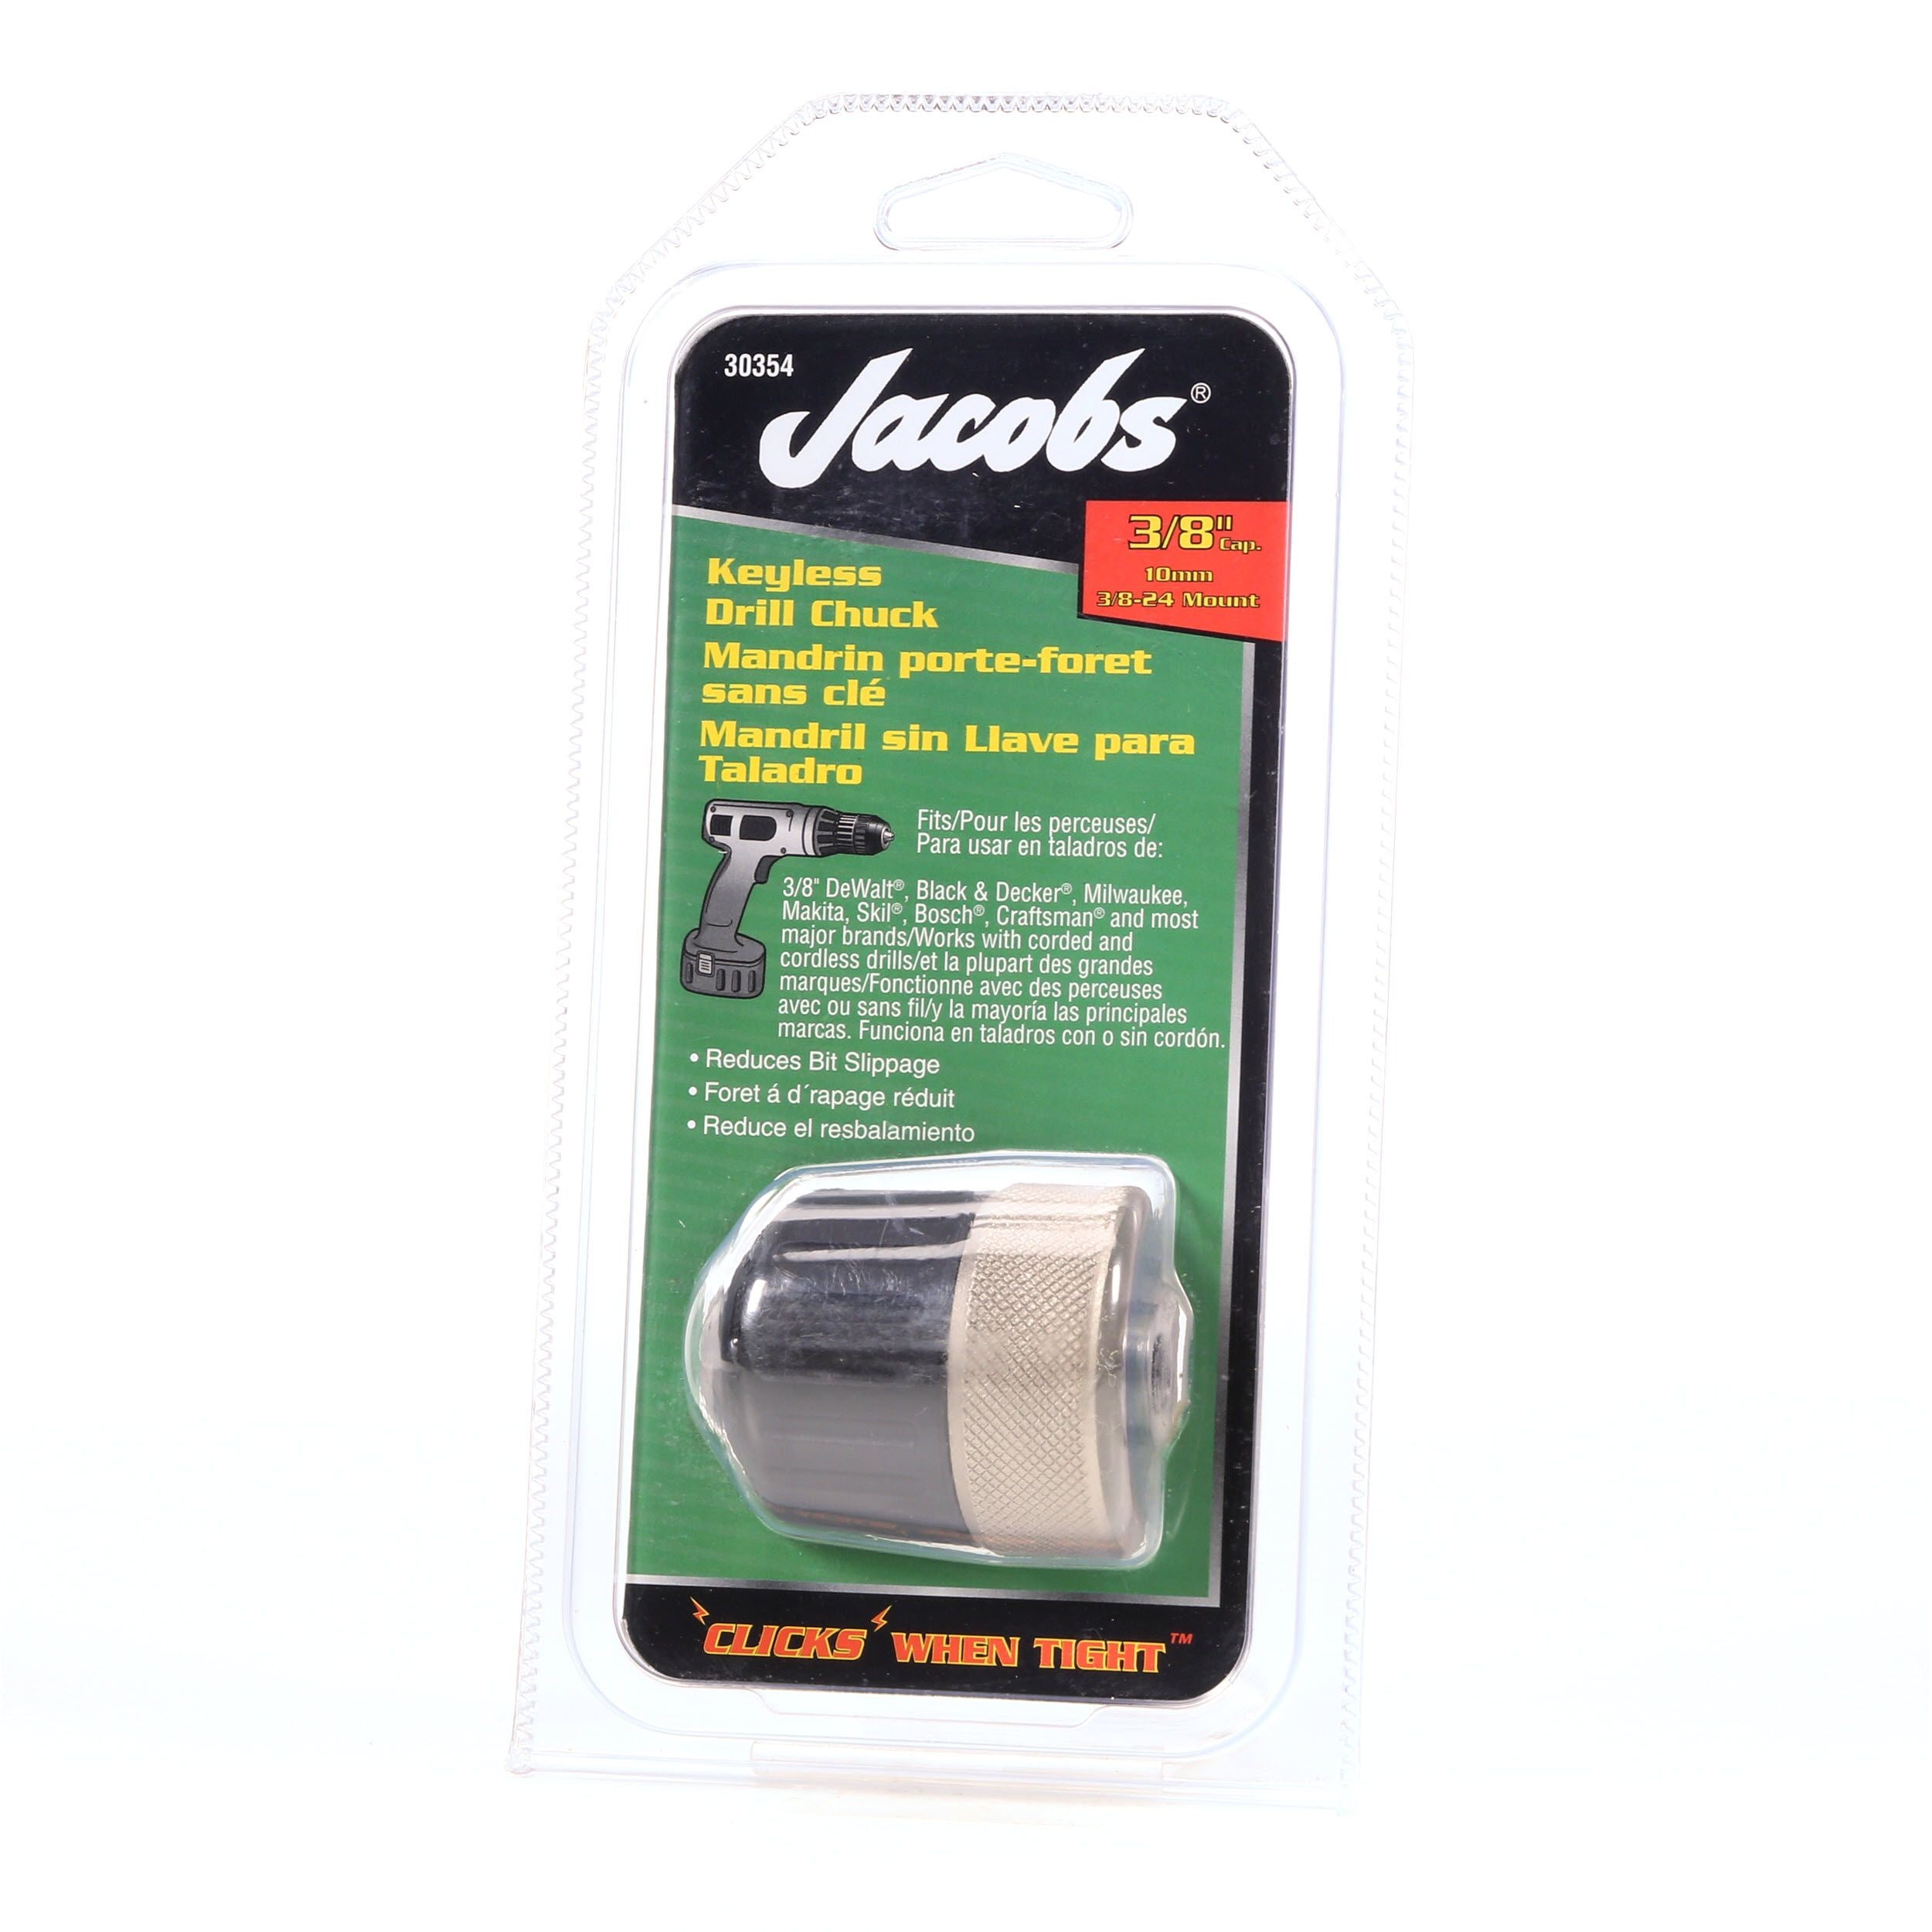 Jacobs 30354 Keyless Drill Chuck 3/8 " 24 Thread for sale online 